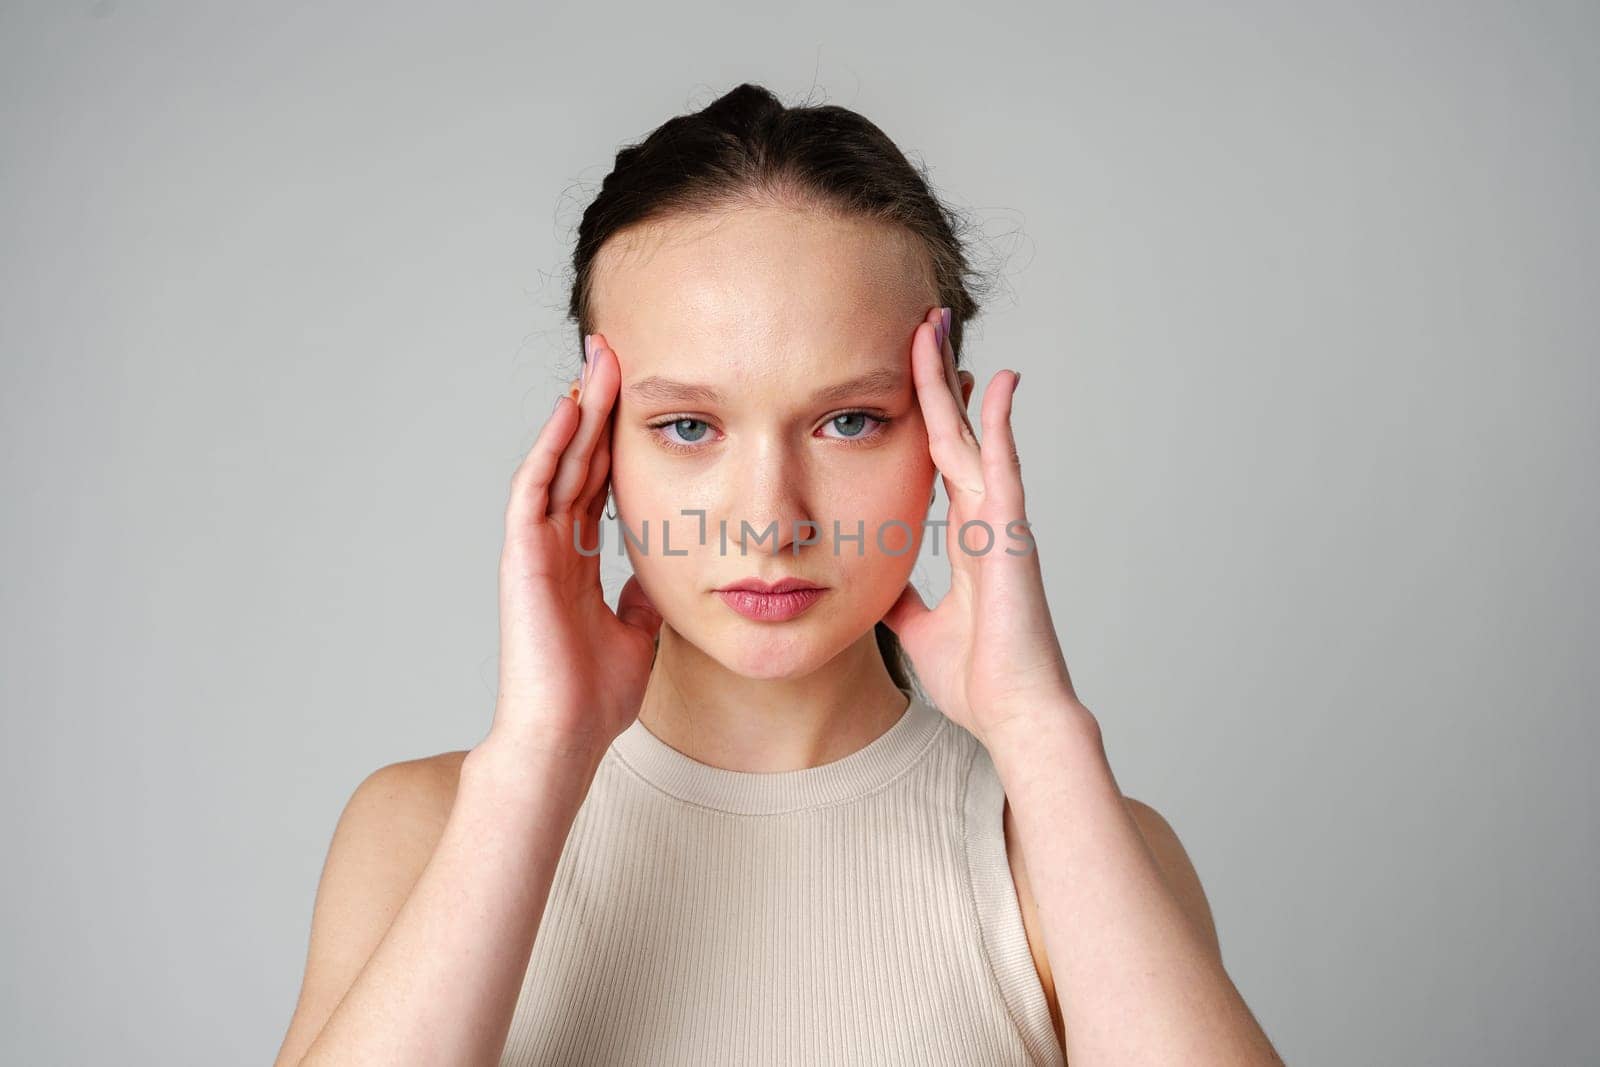 Young Woman Grimacing in Displeasure Against a Neutral Background by Fabrikasimf